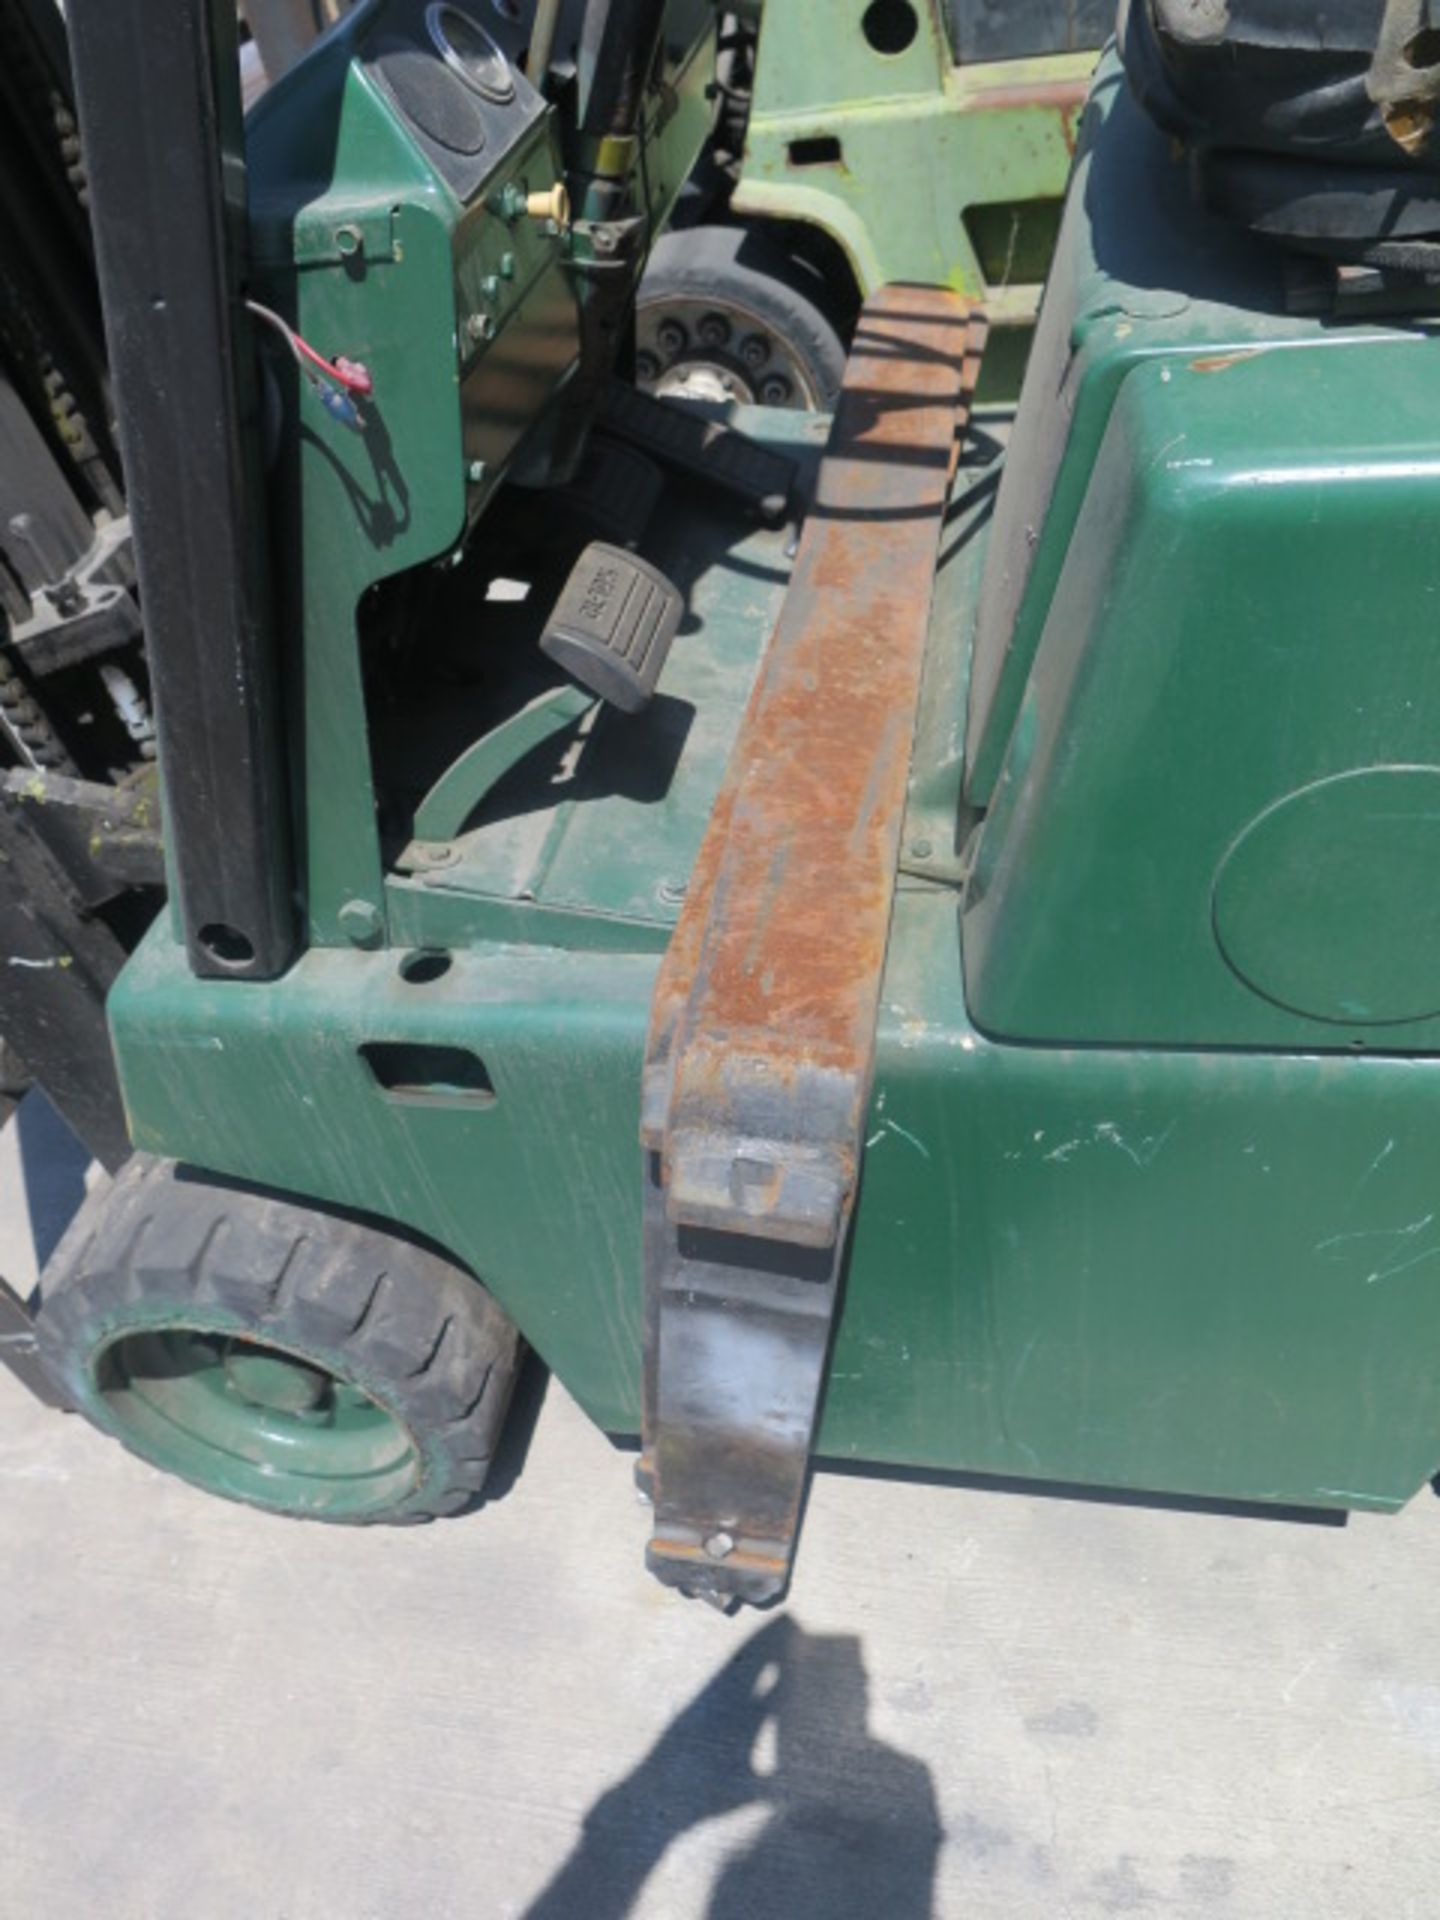 Clark C500-30 2500 Lb Cap LPG Forklift s/n 235-224-5150 w/ 3-Stage Mast, 170” Lift Height, Solid - Image 5 of 6